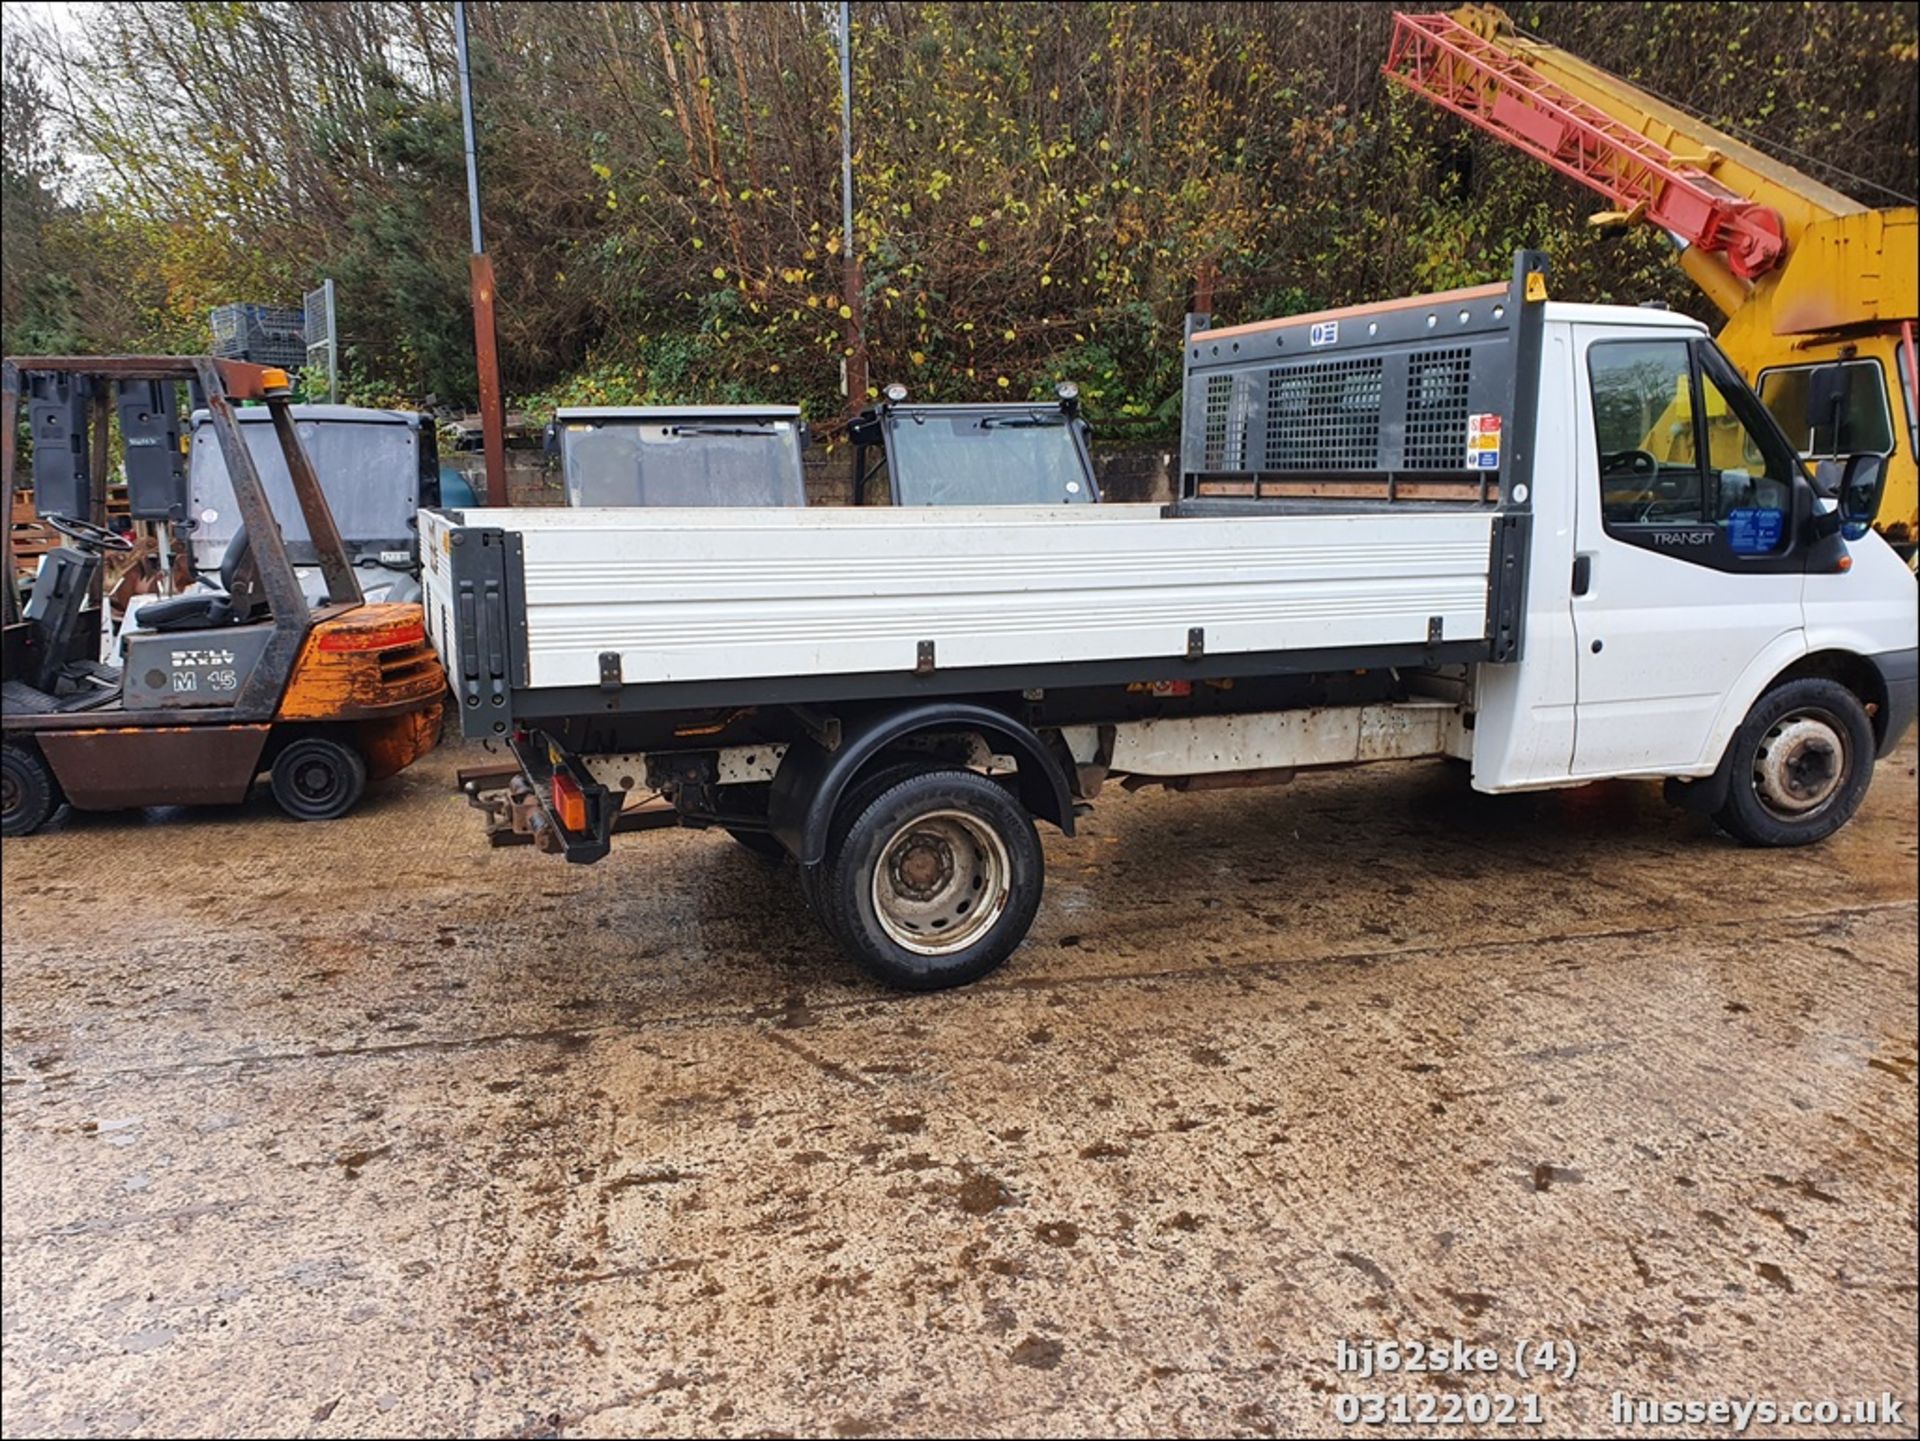 12/62 FORD TRANSIT 125 T350 RWD - 2198cc 2dr Tipper (White, 133k) - Image 5 of 16